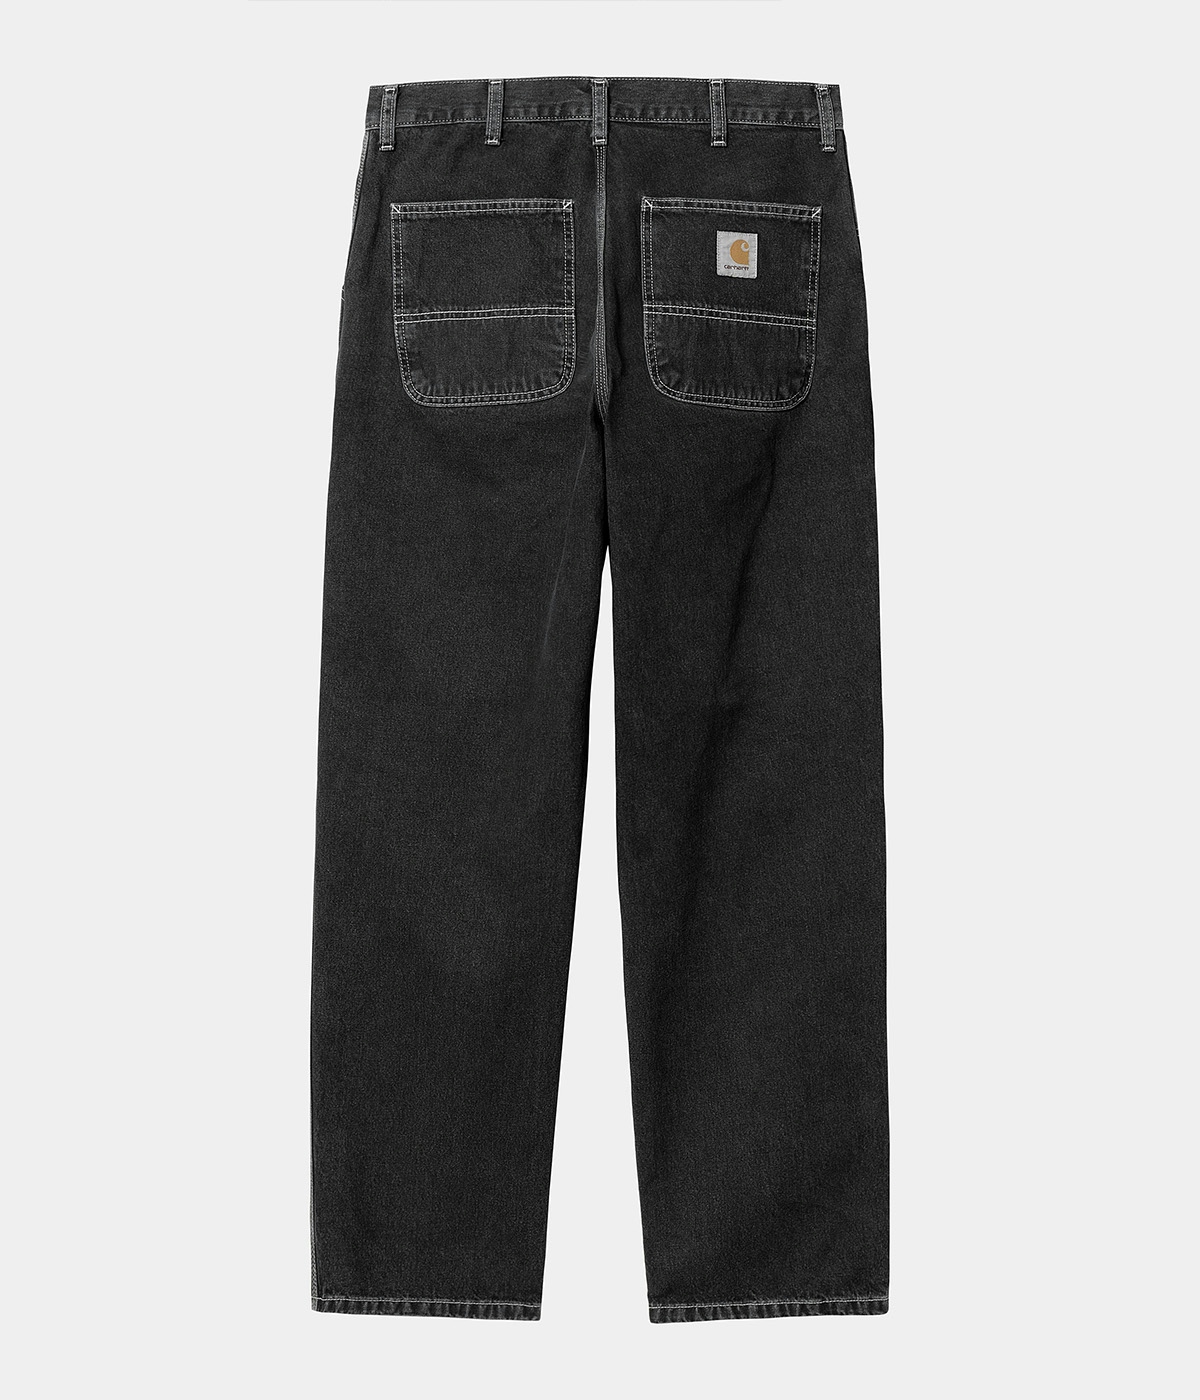 Carhartt Pant Simple Black/Stone washed 4